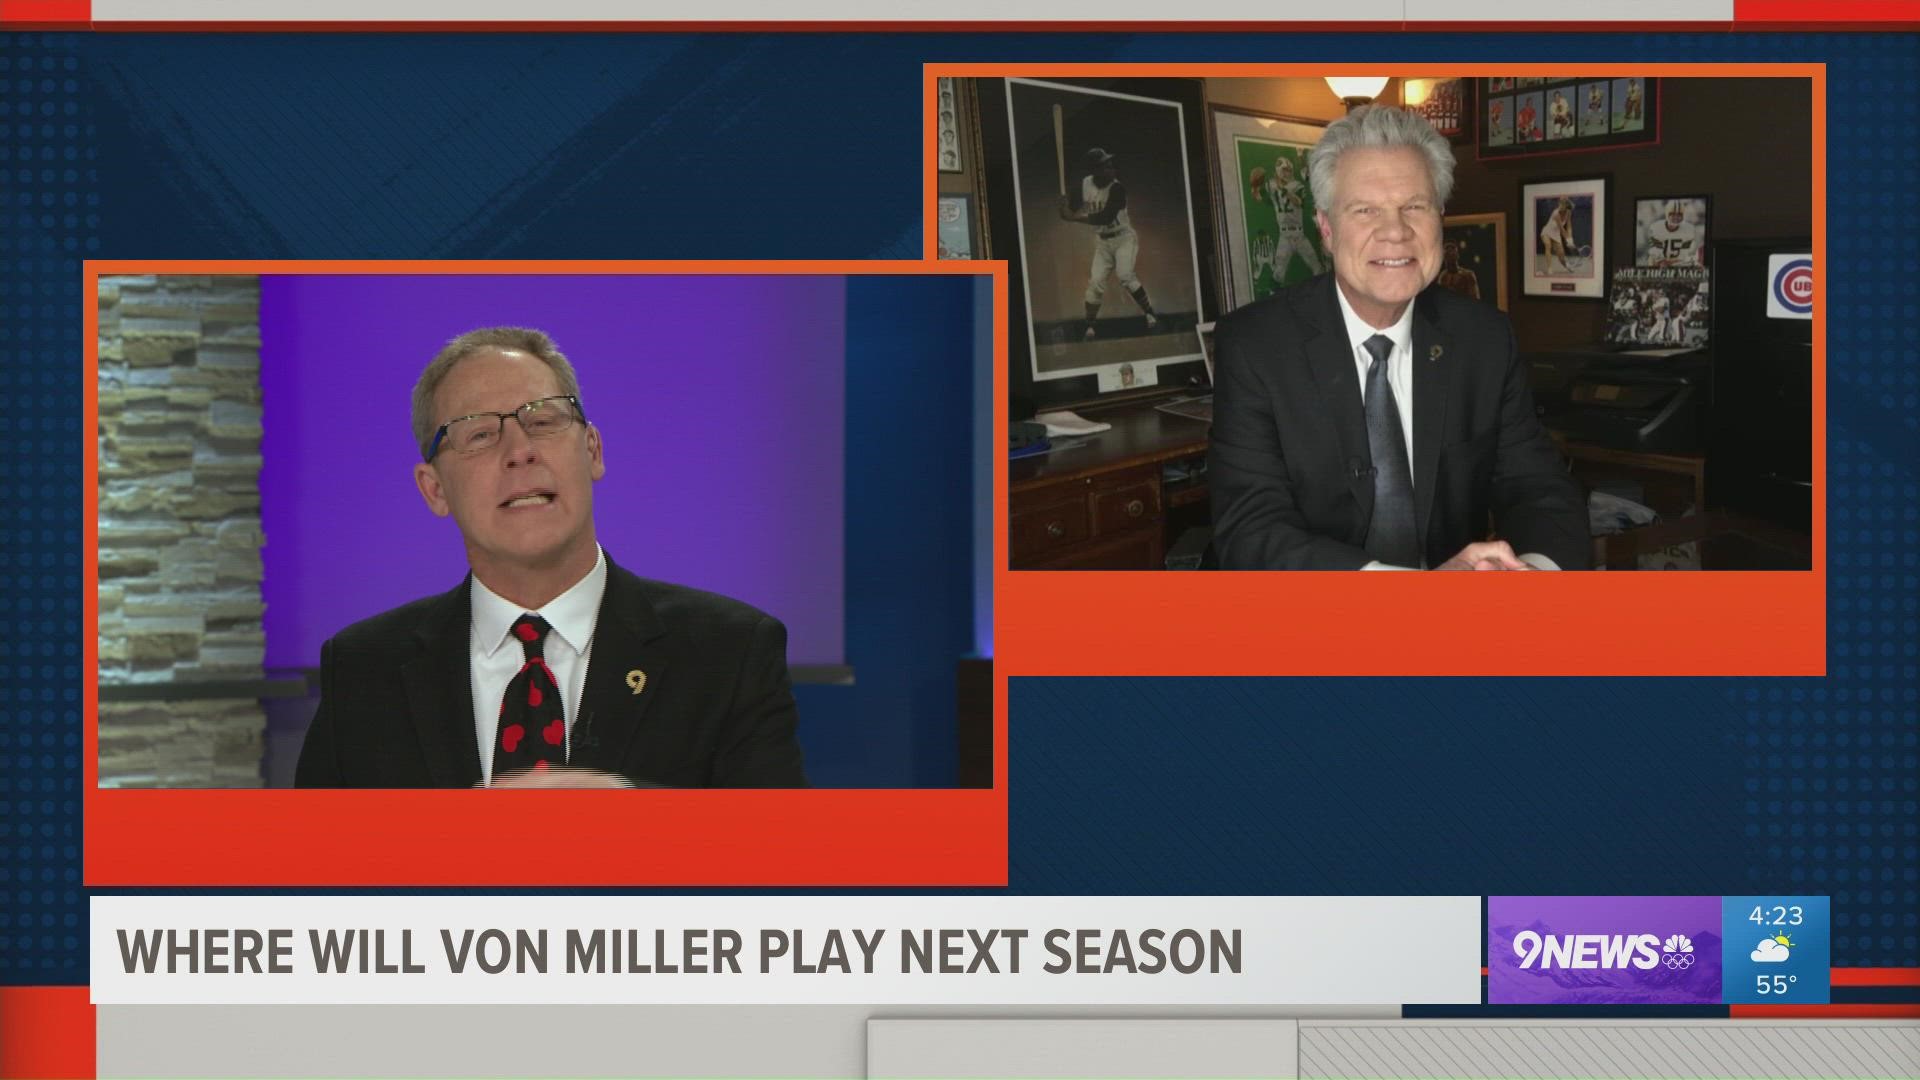 Mike Klis joined Rod Mackey to discuss the latest NFL news the day after Super Bowl LVI.